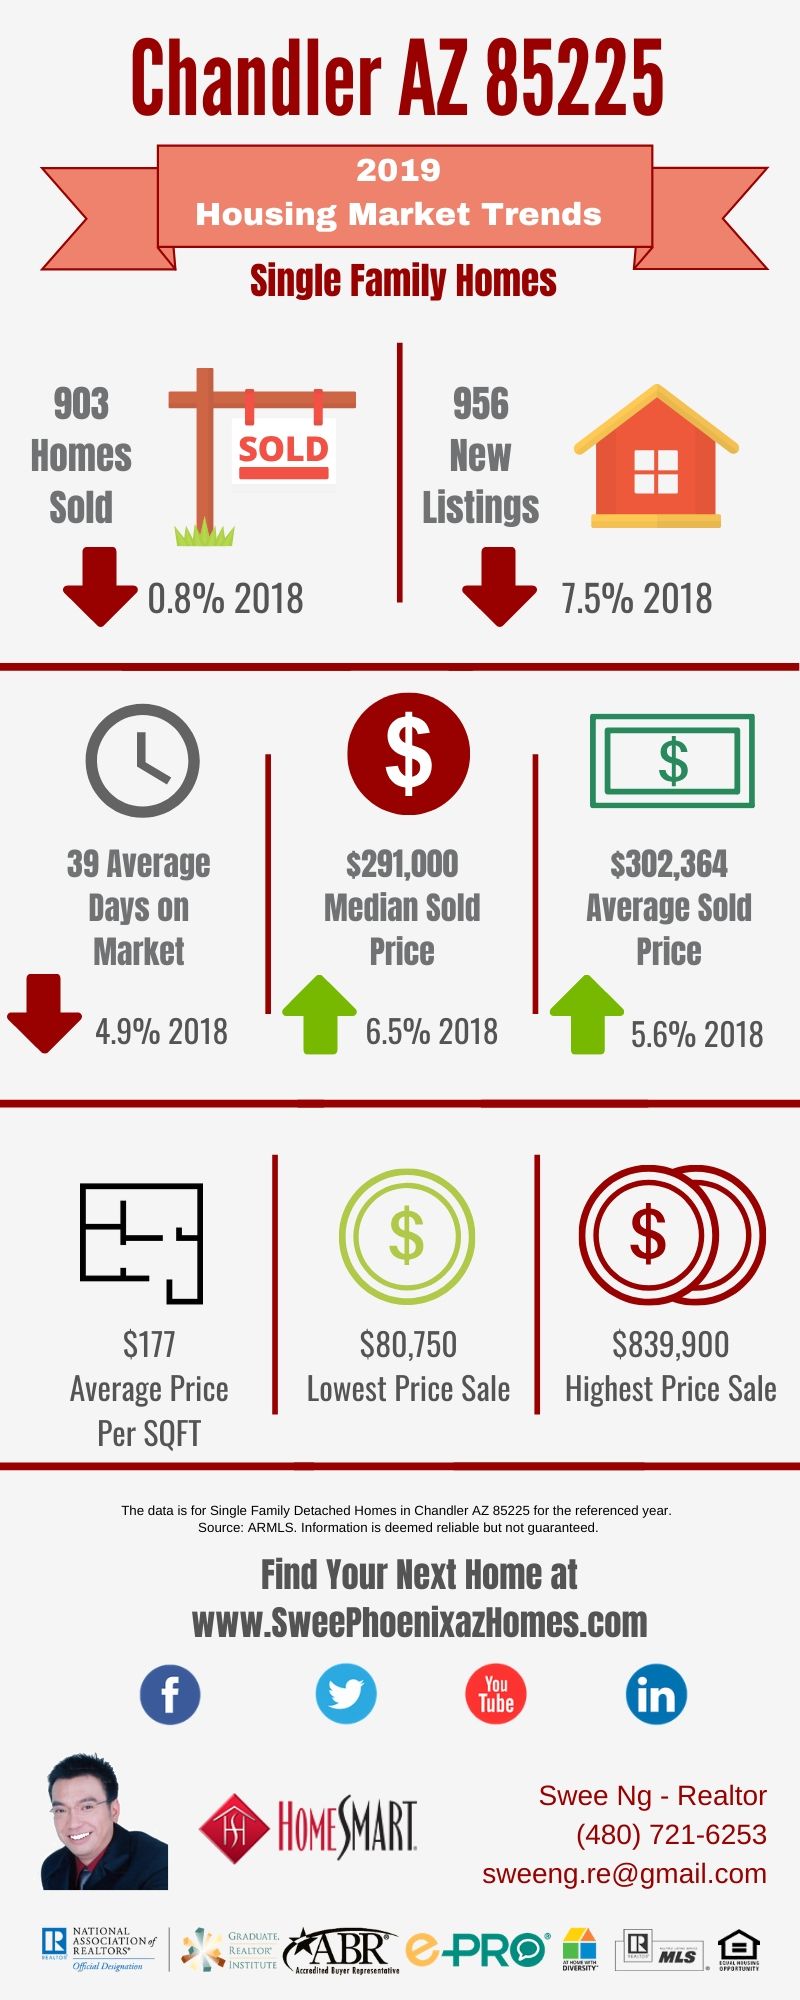 Chandler AZ 85225 Housing Market Trends Report 2019, House Value, Real Estate and Statistic by Swee Ng